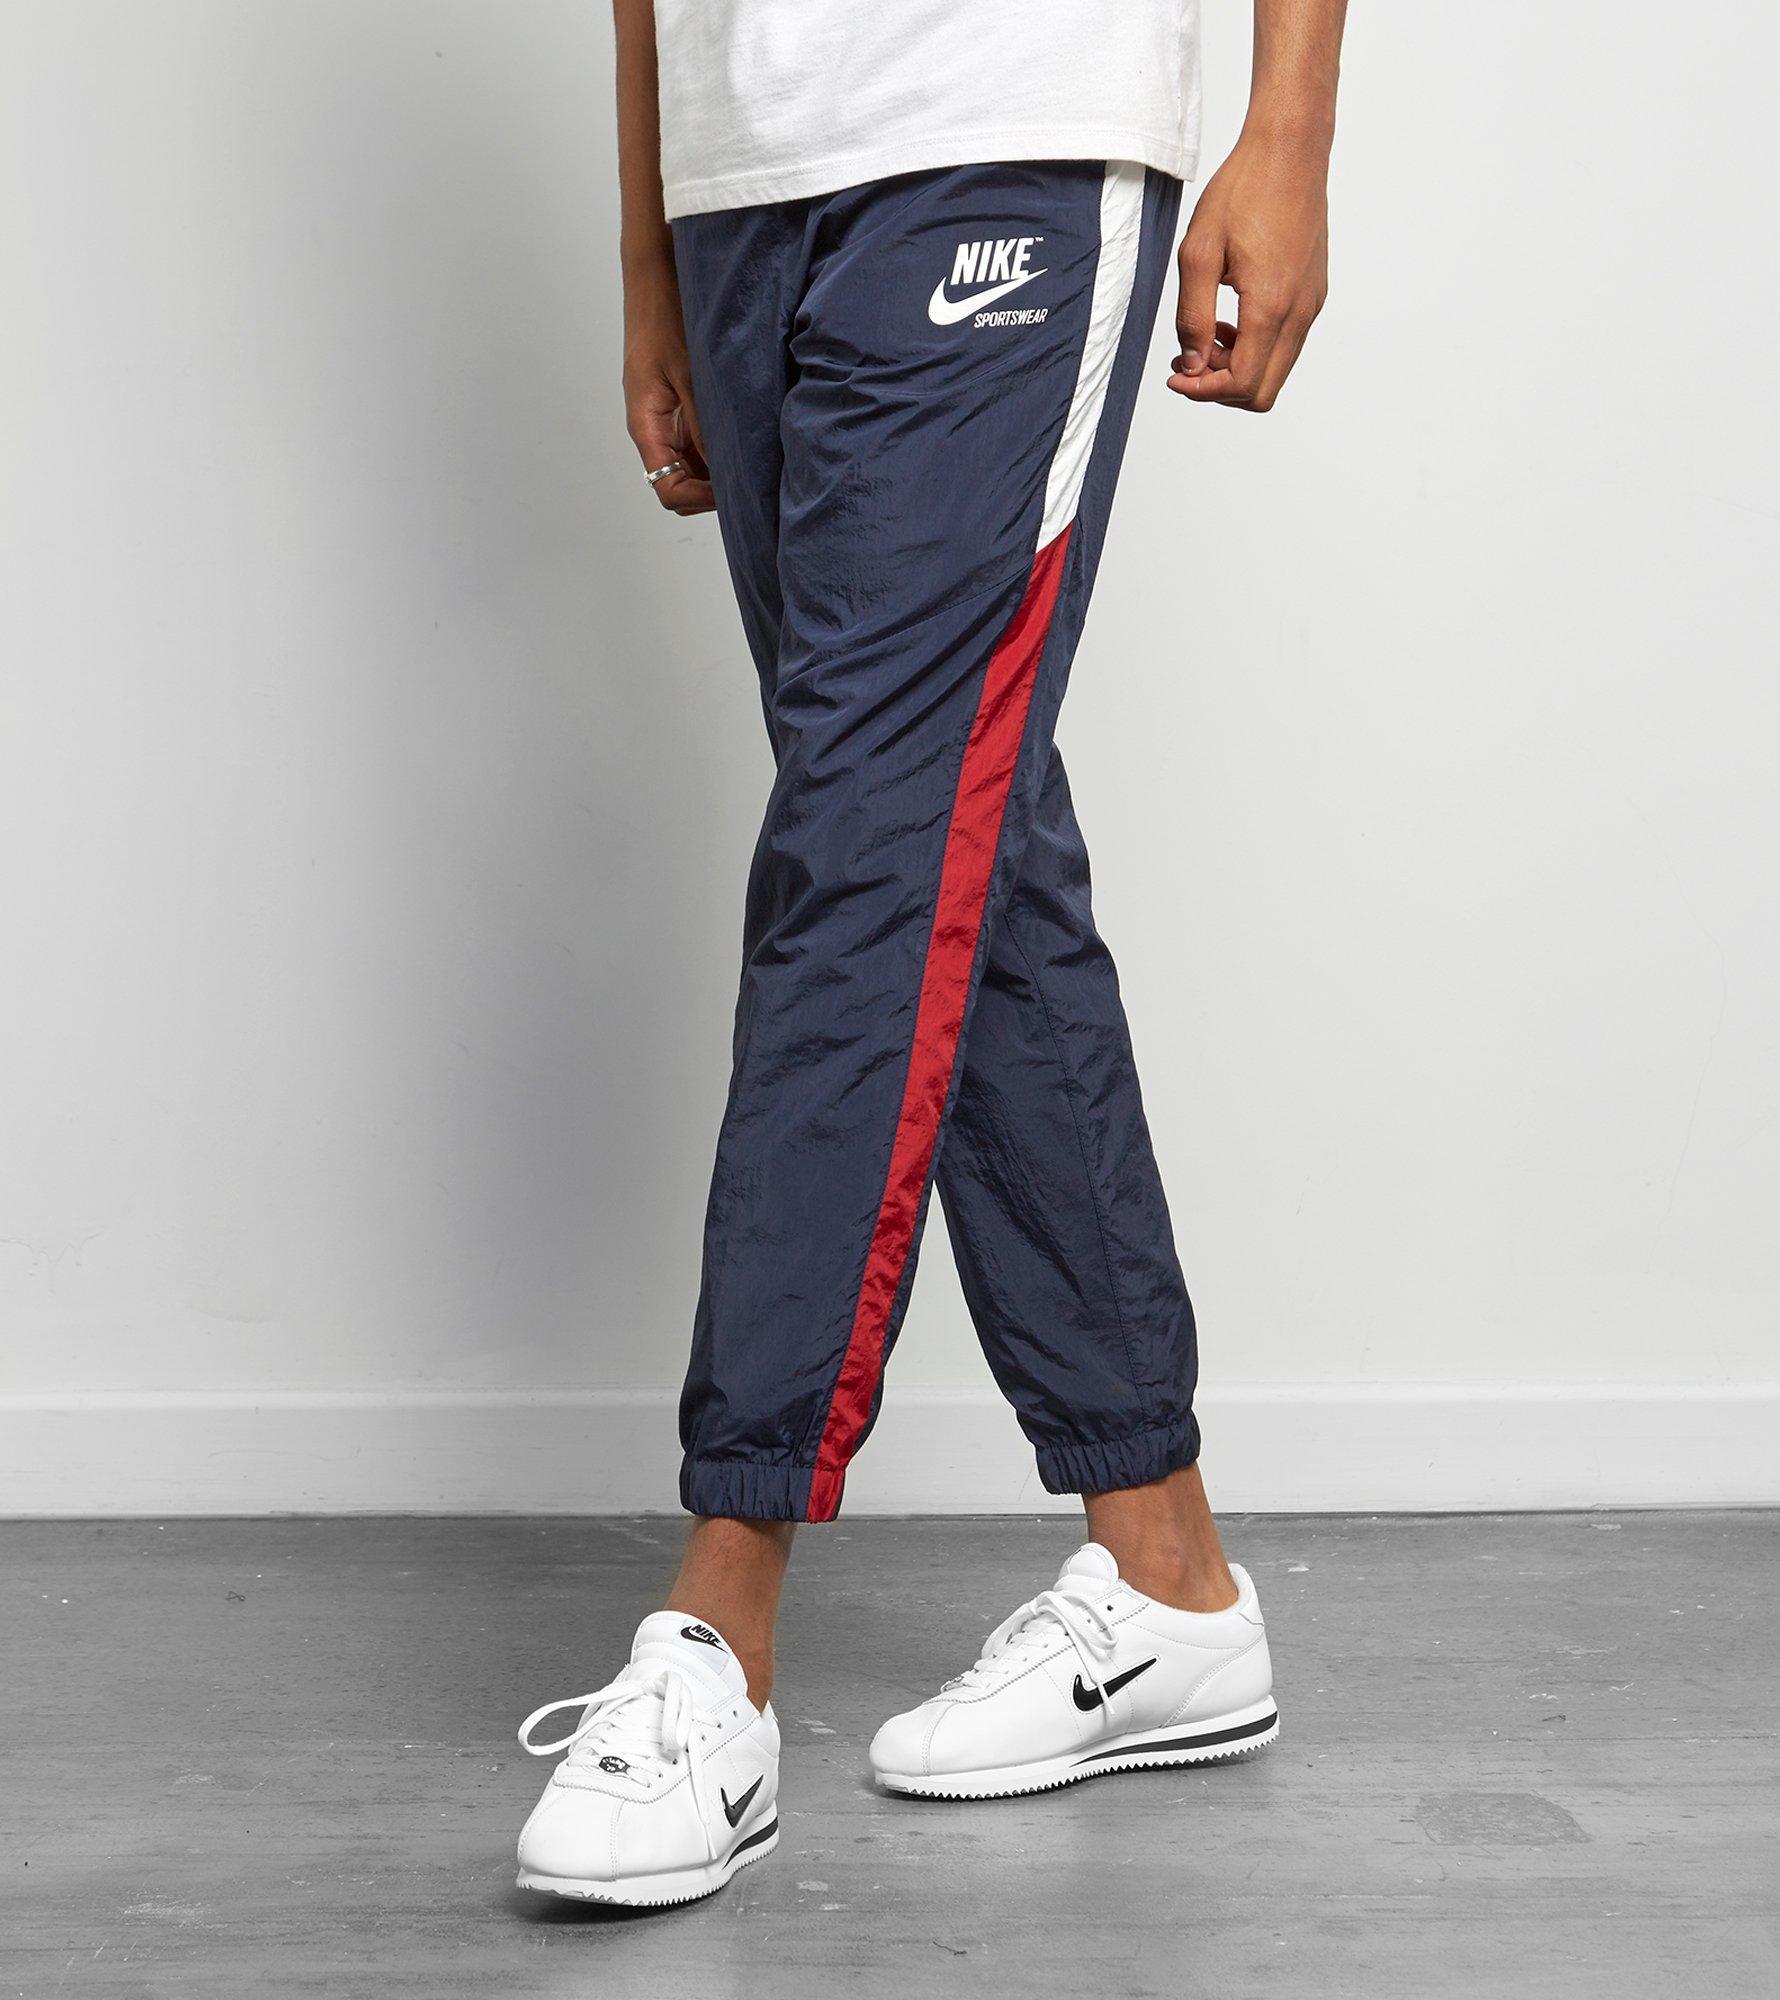 Nike Archive Woven Track Pants in Navy (Blue) for Men - Lyst